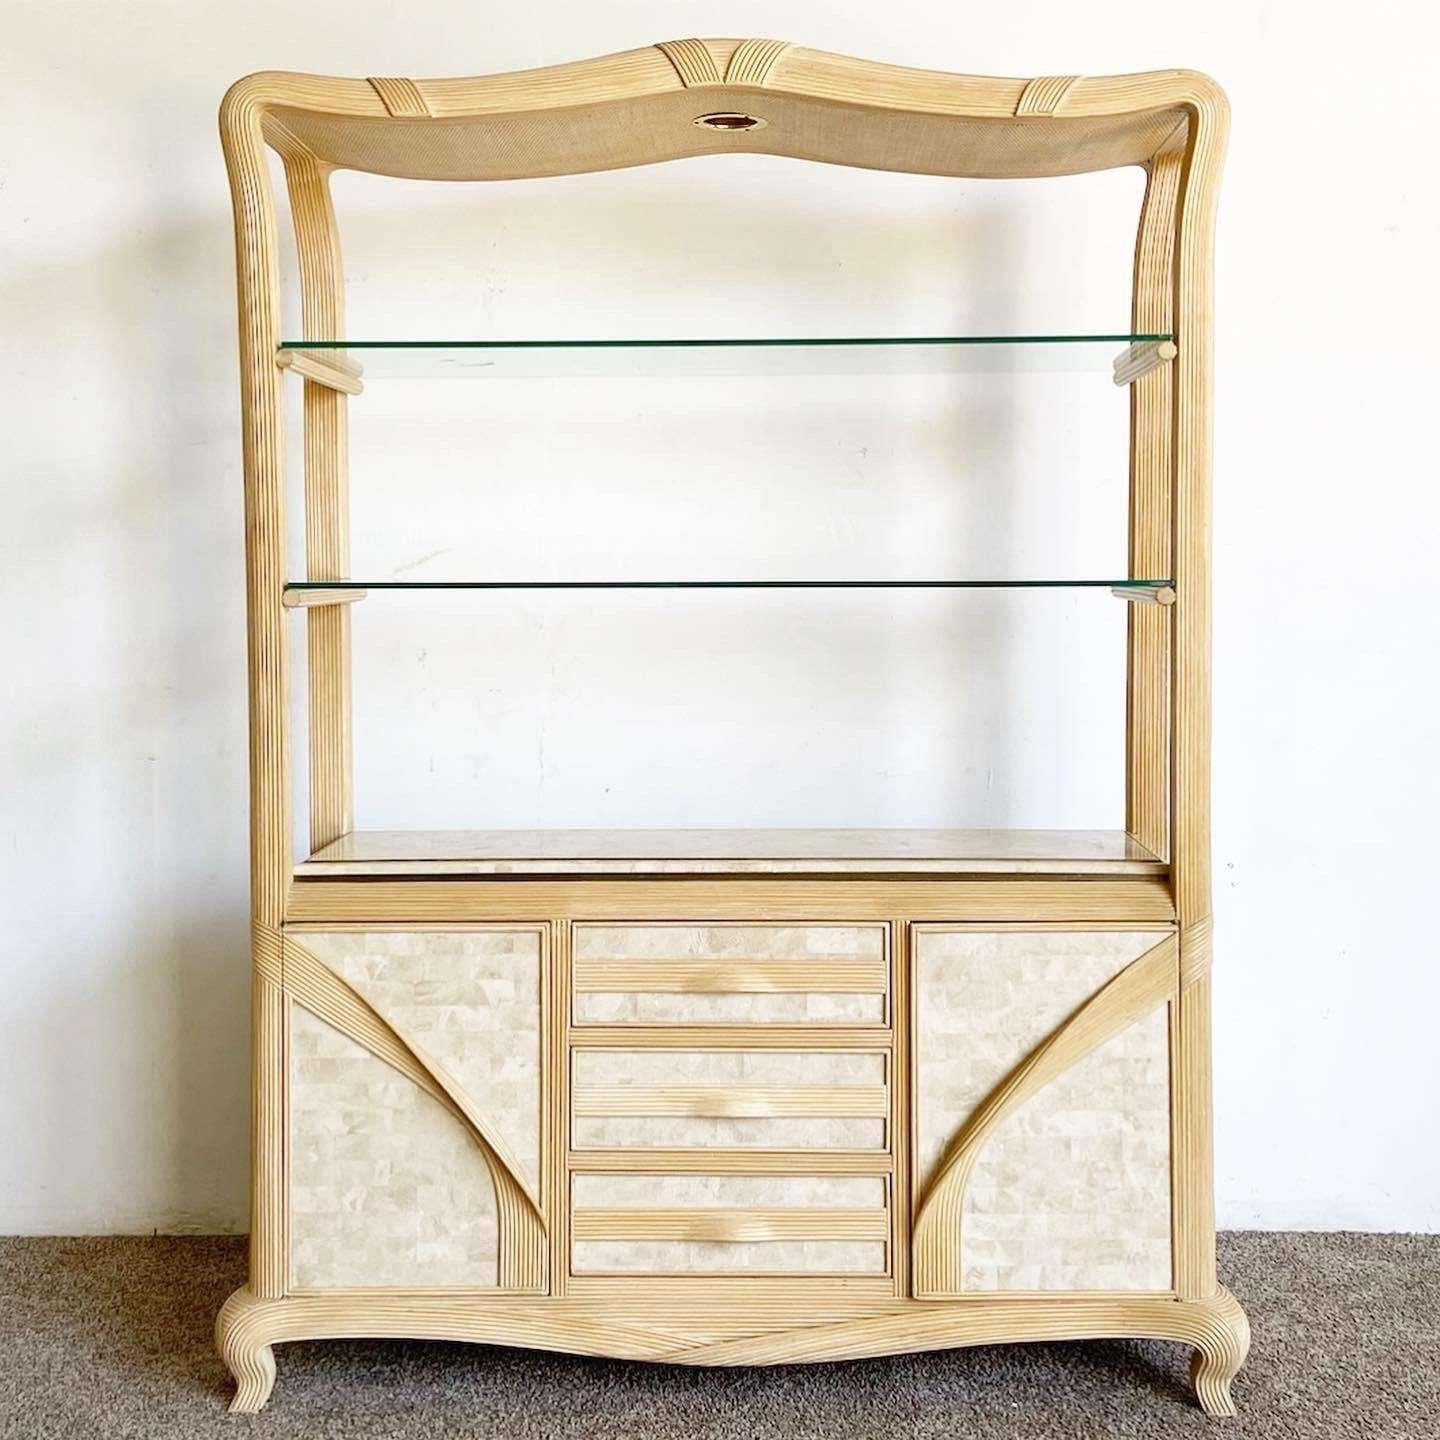 Exceptional vintage postmodern Etagere. Features a pencil reed ribbon frame with tessellated stone throughout the surfaces.